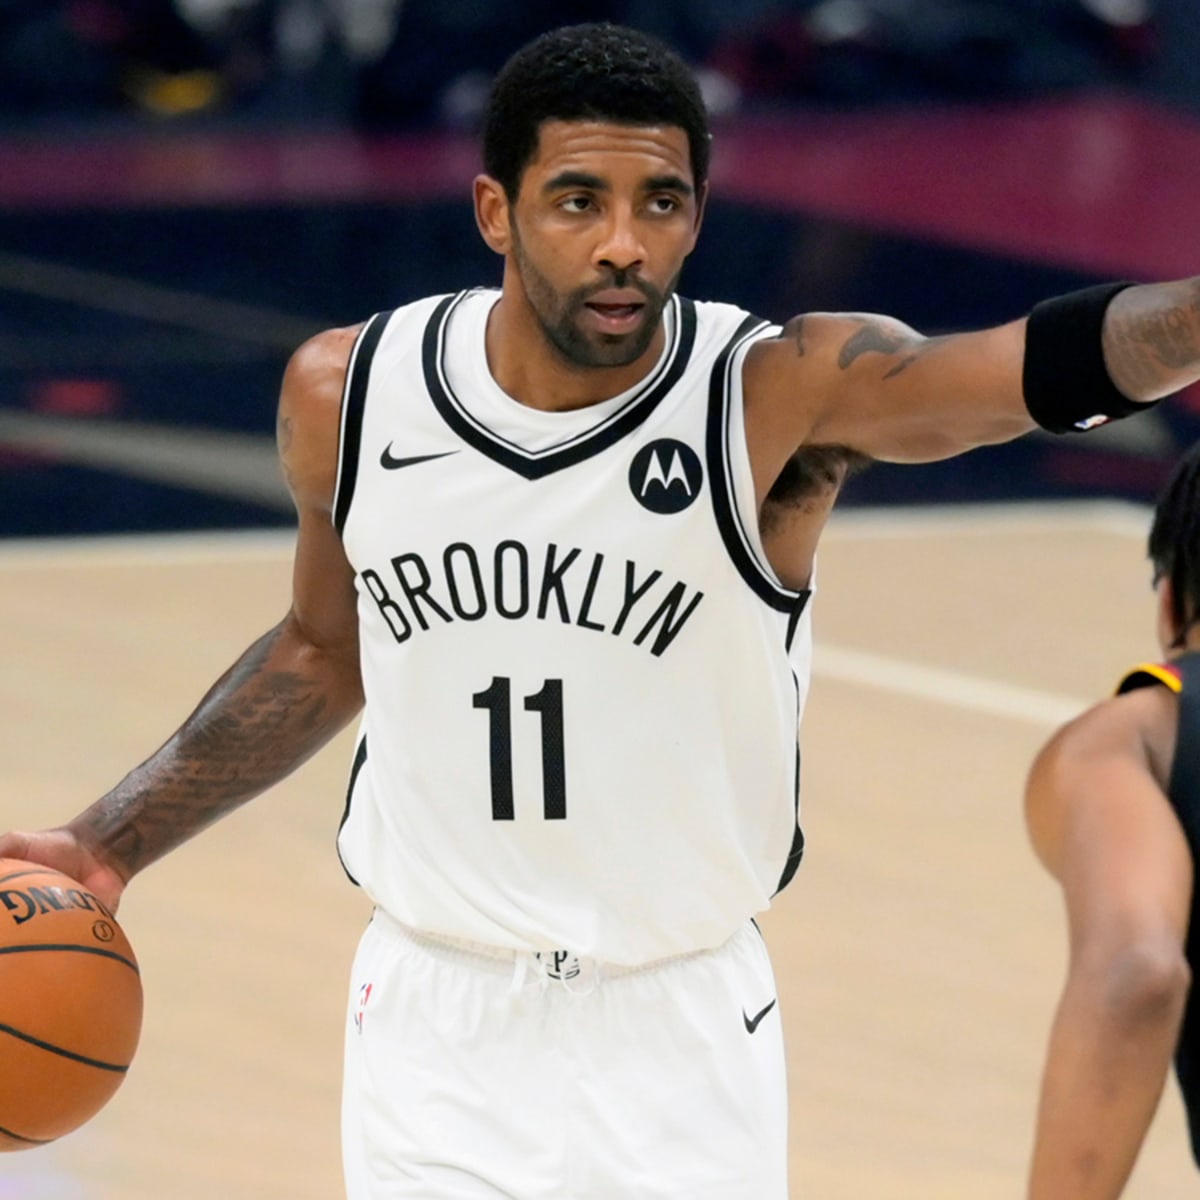 nets kyrie irving